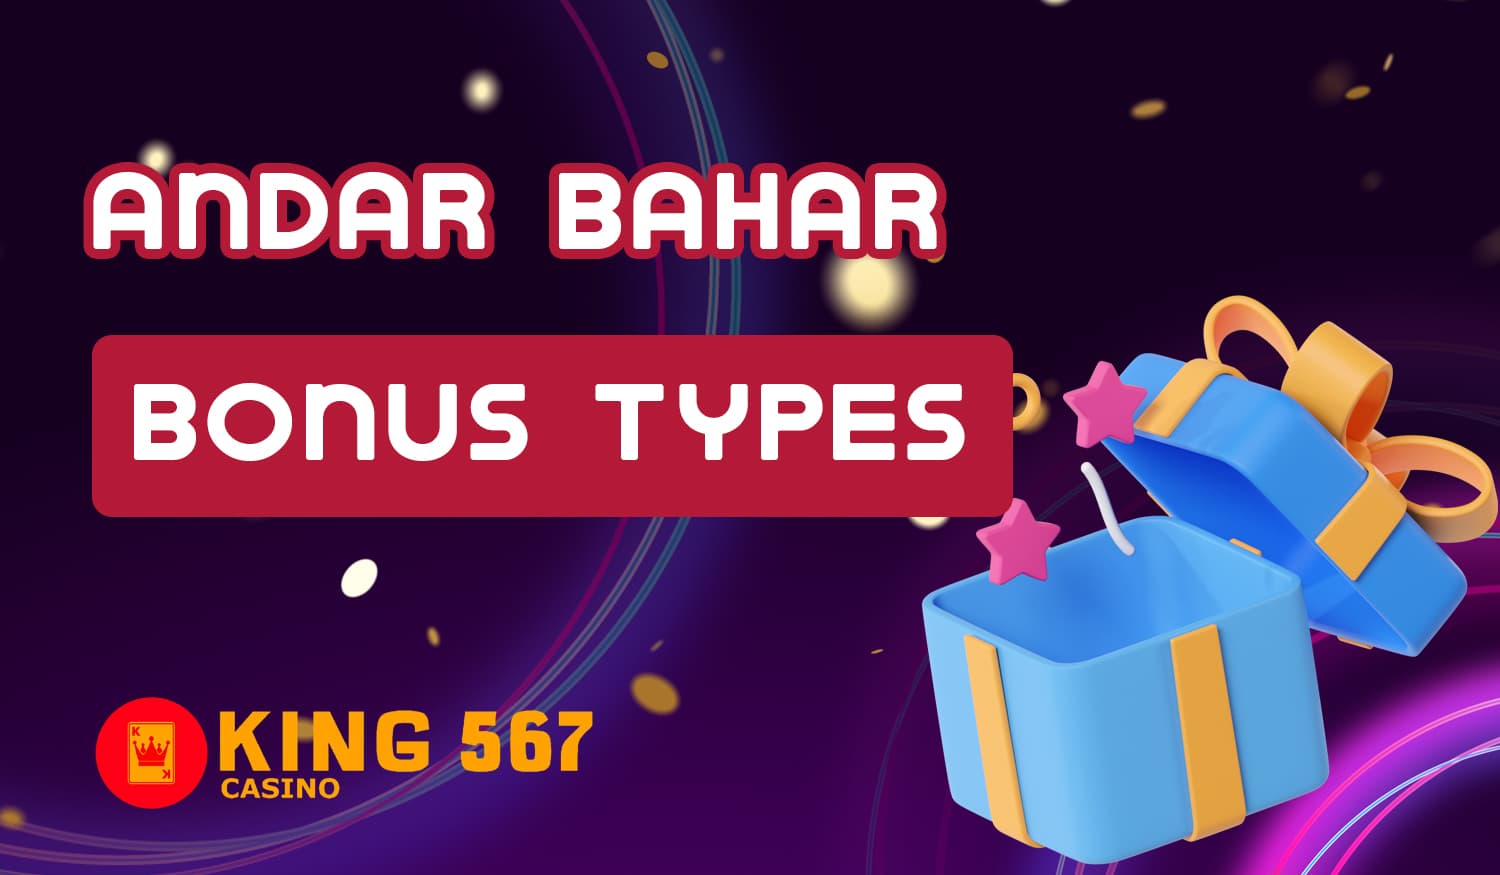 The available types of bonuses in online casino section on King 567 Casino website for Indian users